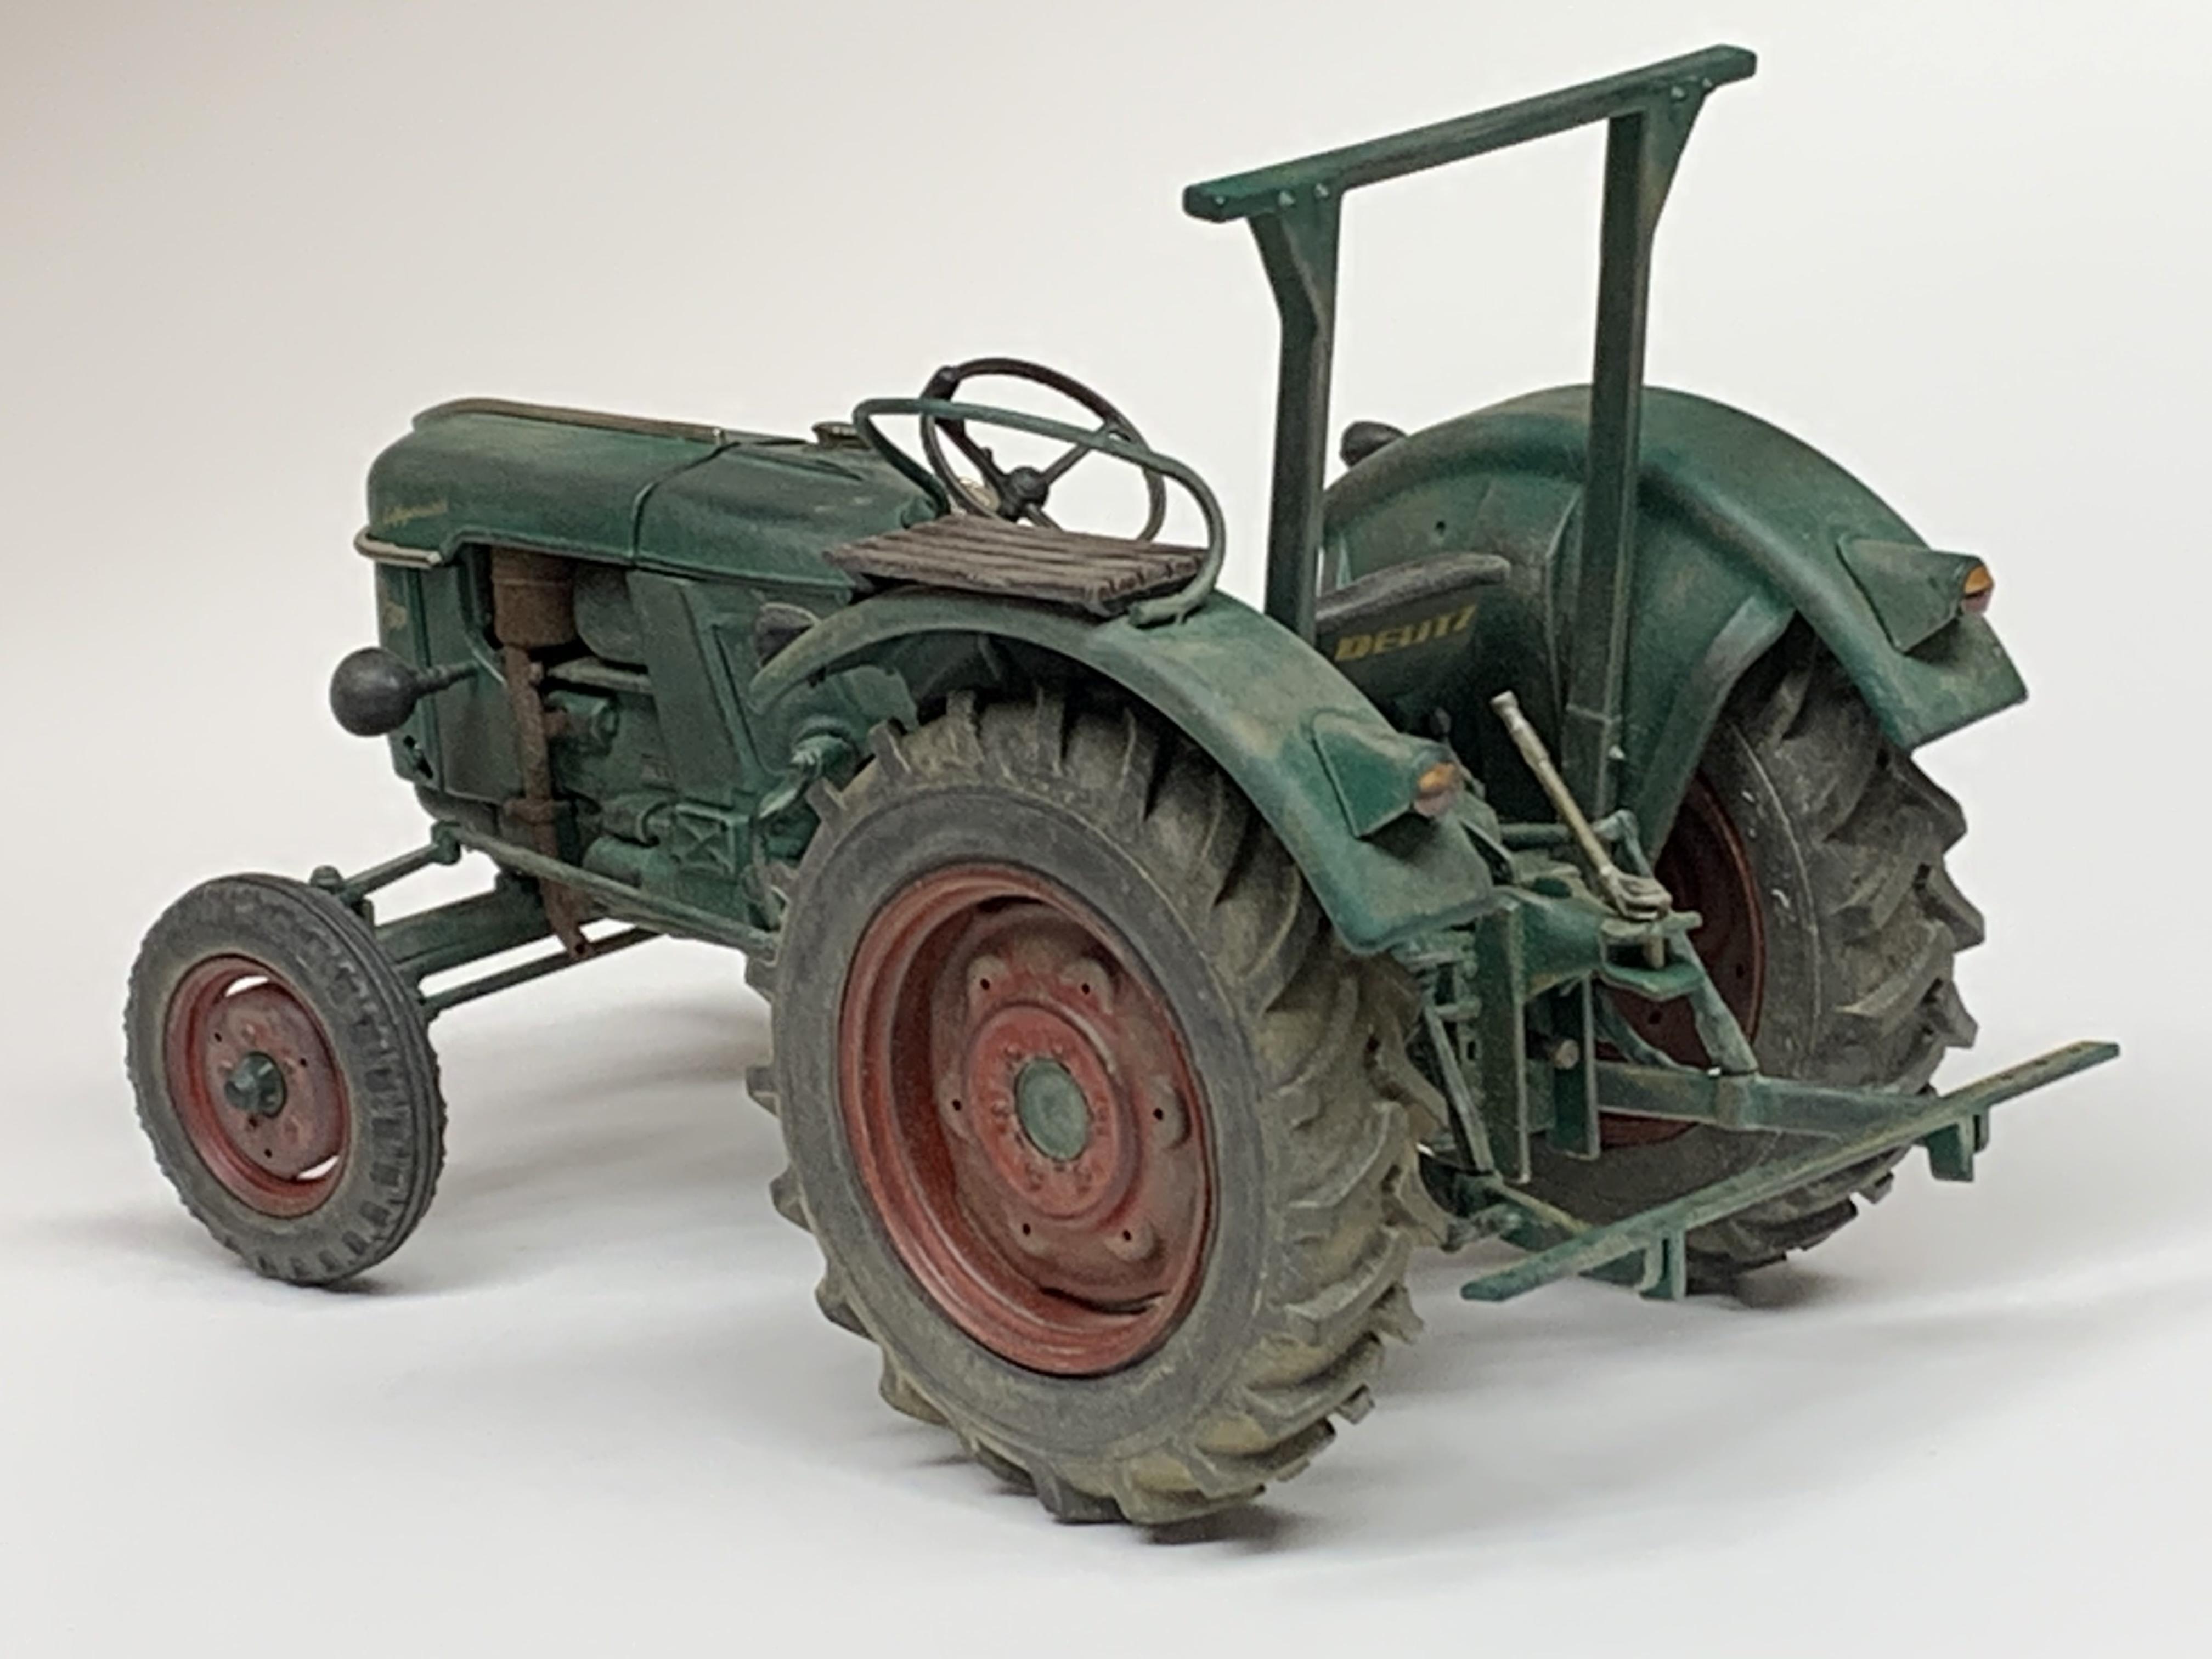 Deutz D30 - WIP: All The Rest: Motorcycles, Aviation, Military, Sci-Fi,  Figures - Model Cars Magazine Forum